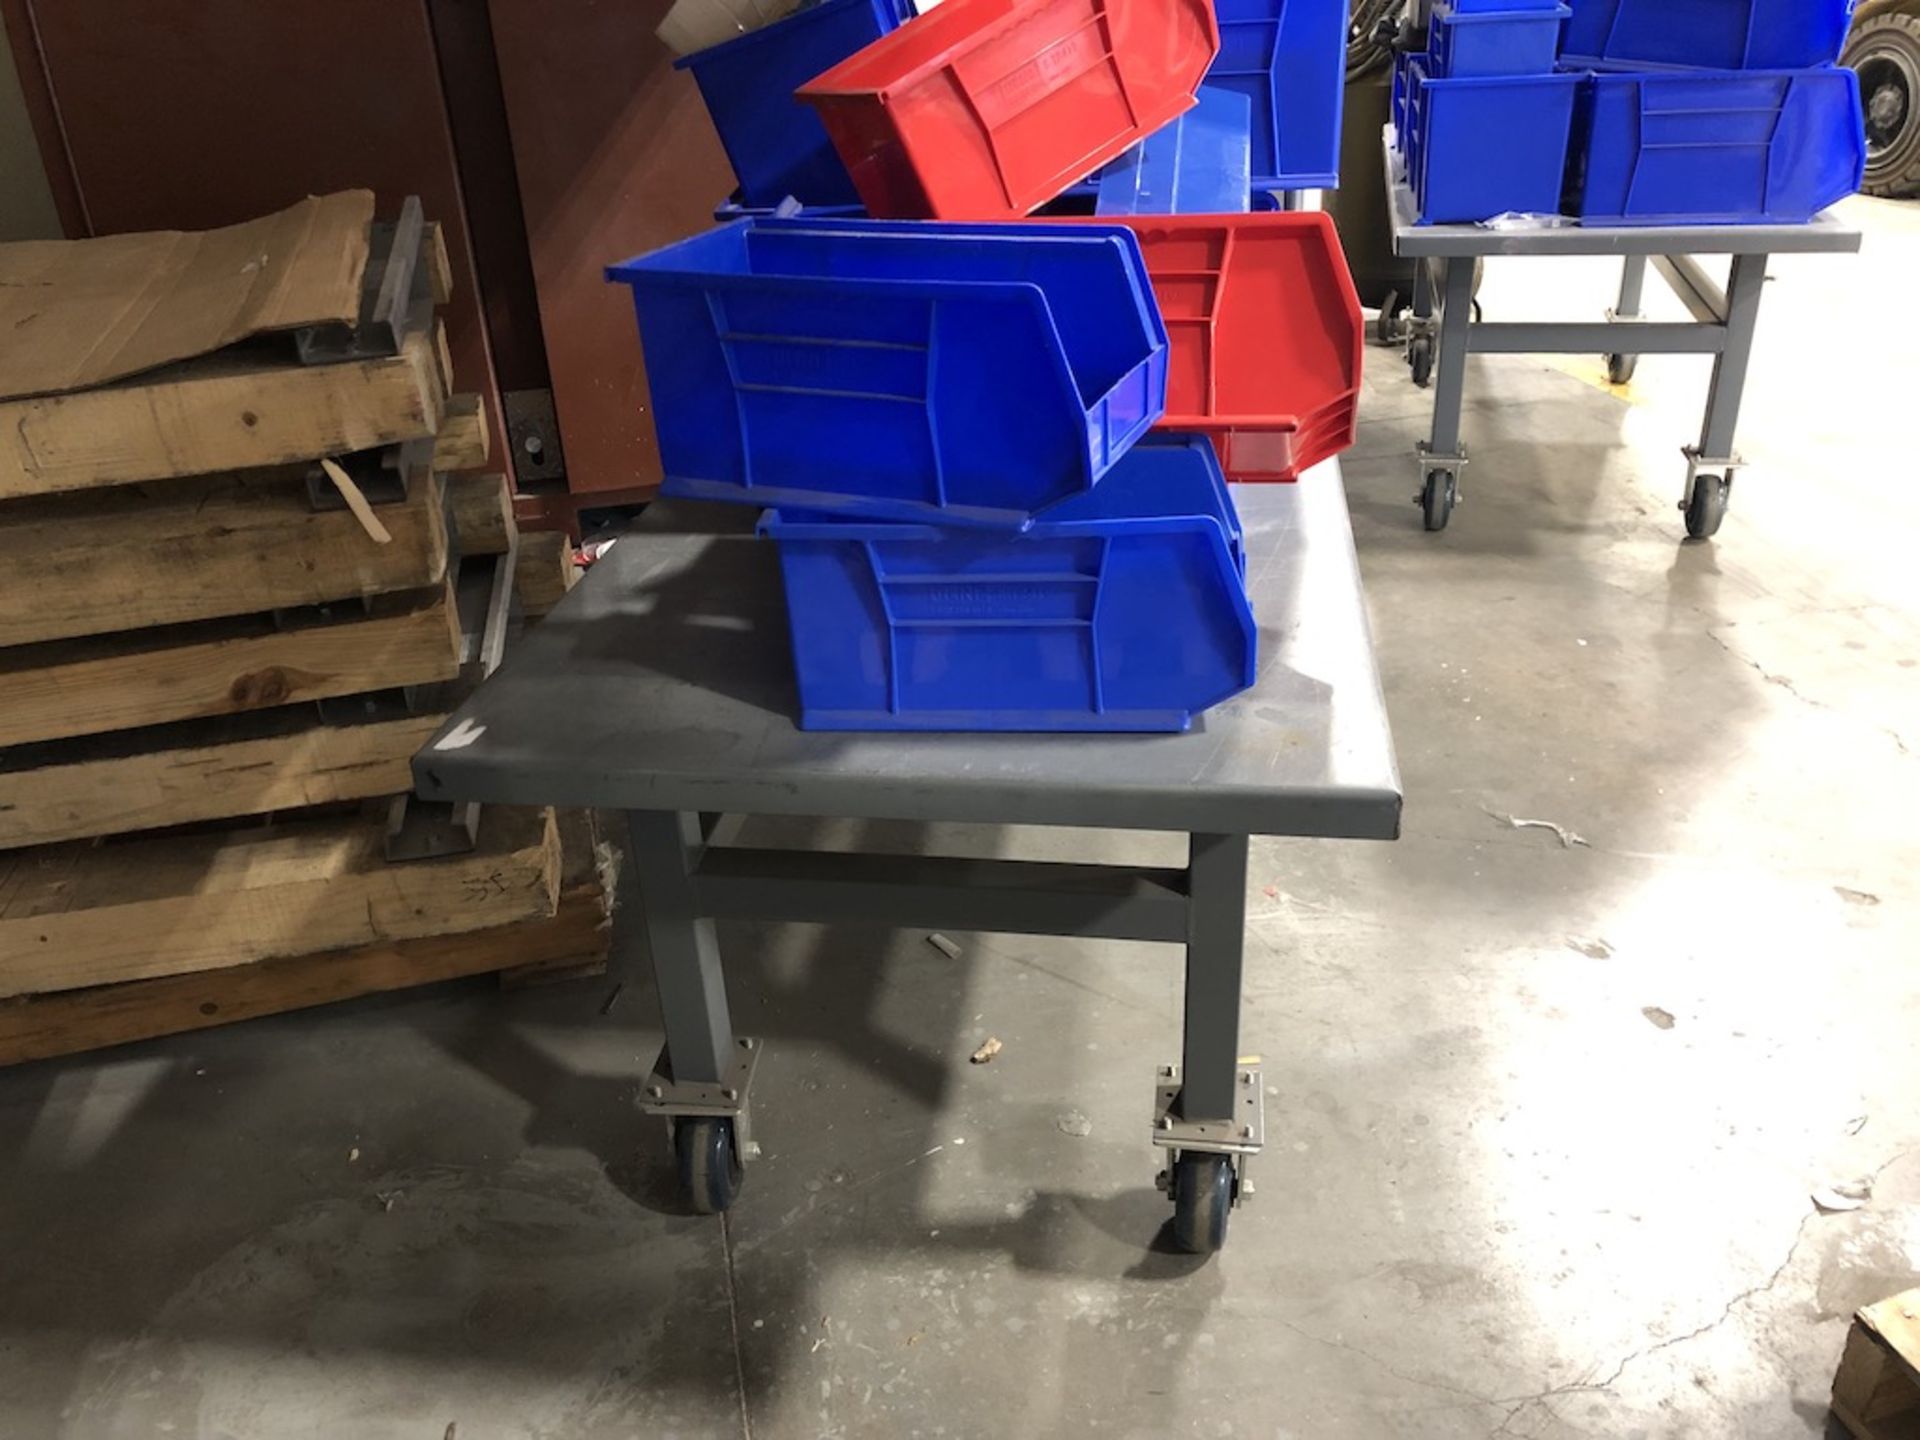 ULINE STEEL PLATFORM CART ( CONTENTS NOT INCLUDED ) 64IN L X 30 IN W X 37 IN H - Image 6 of 7